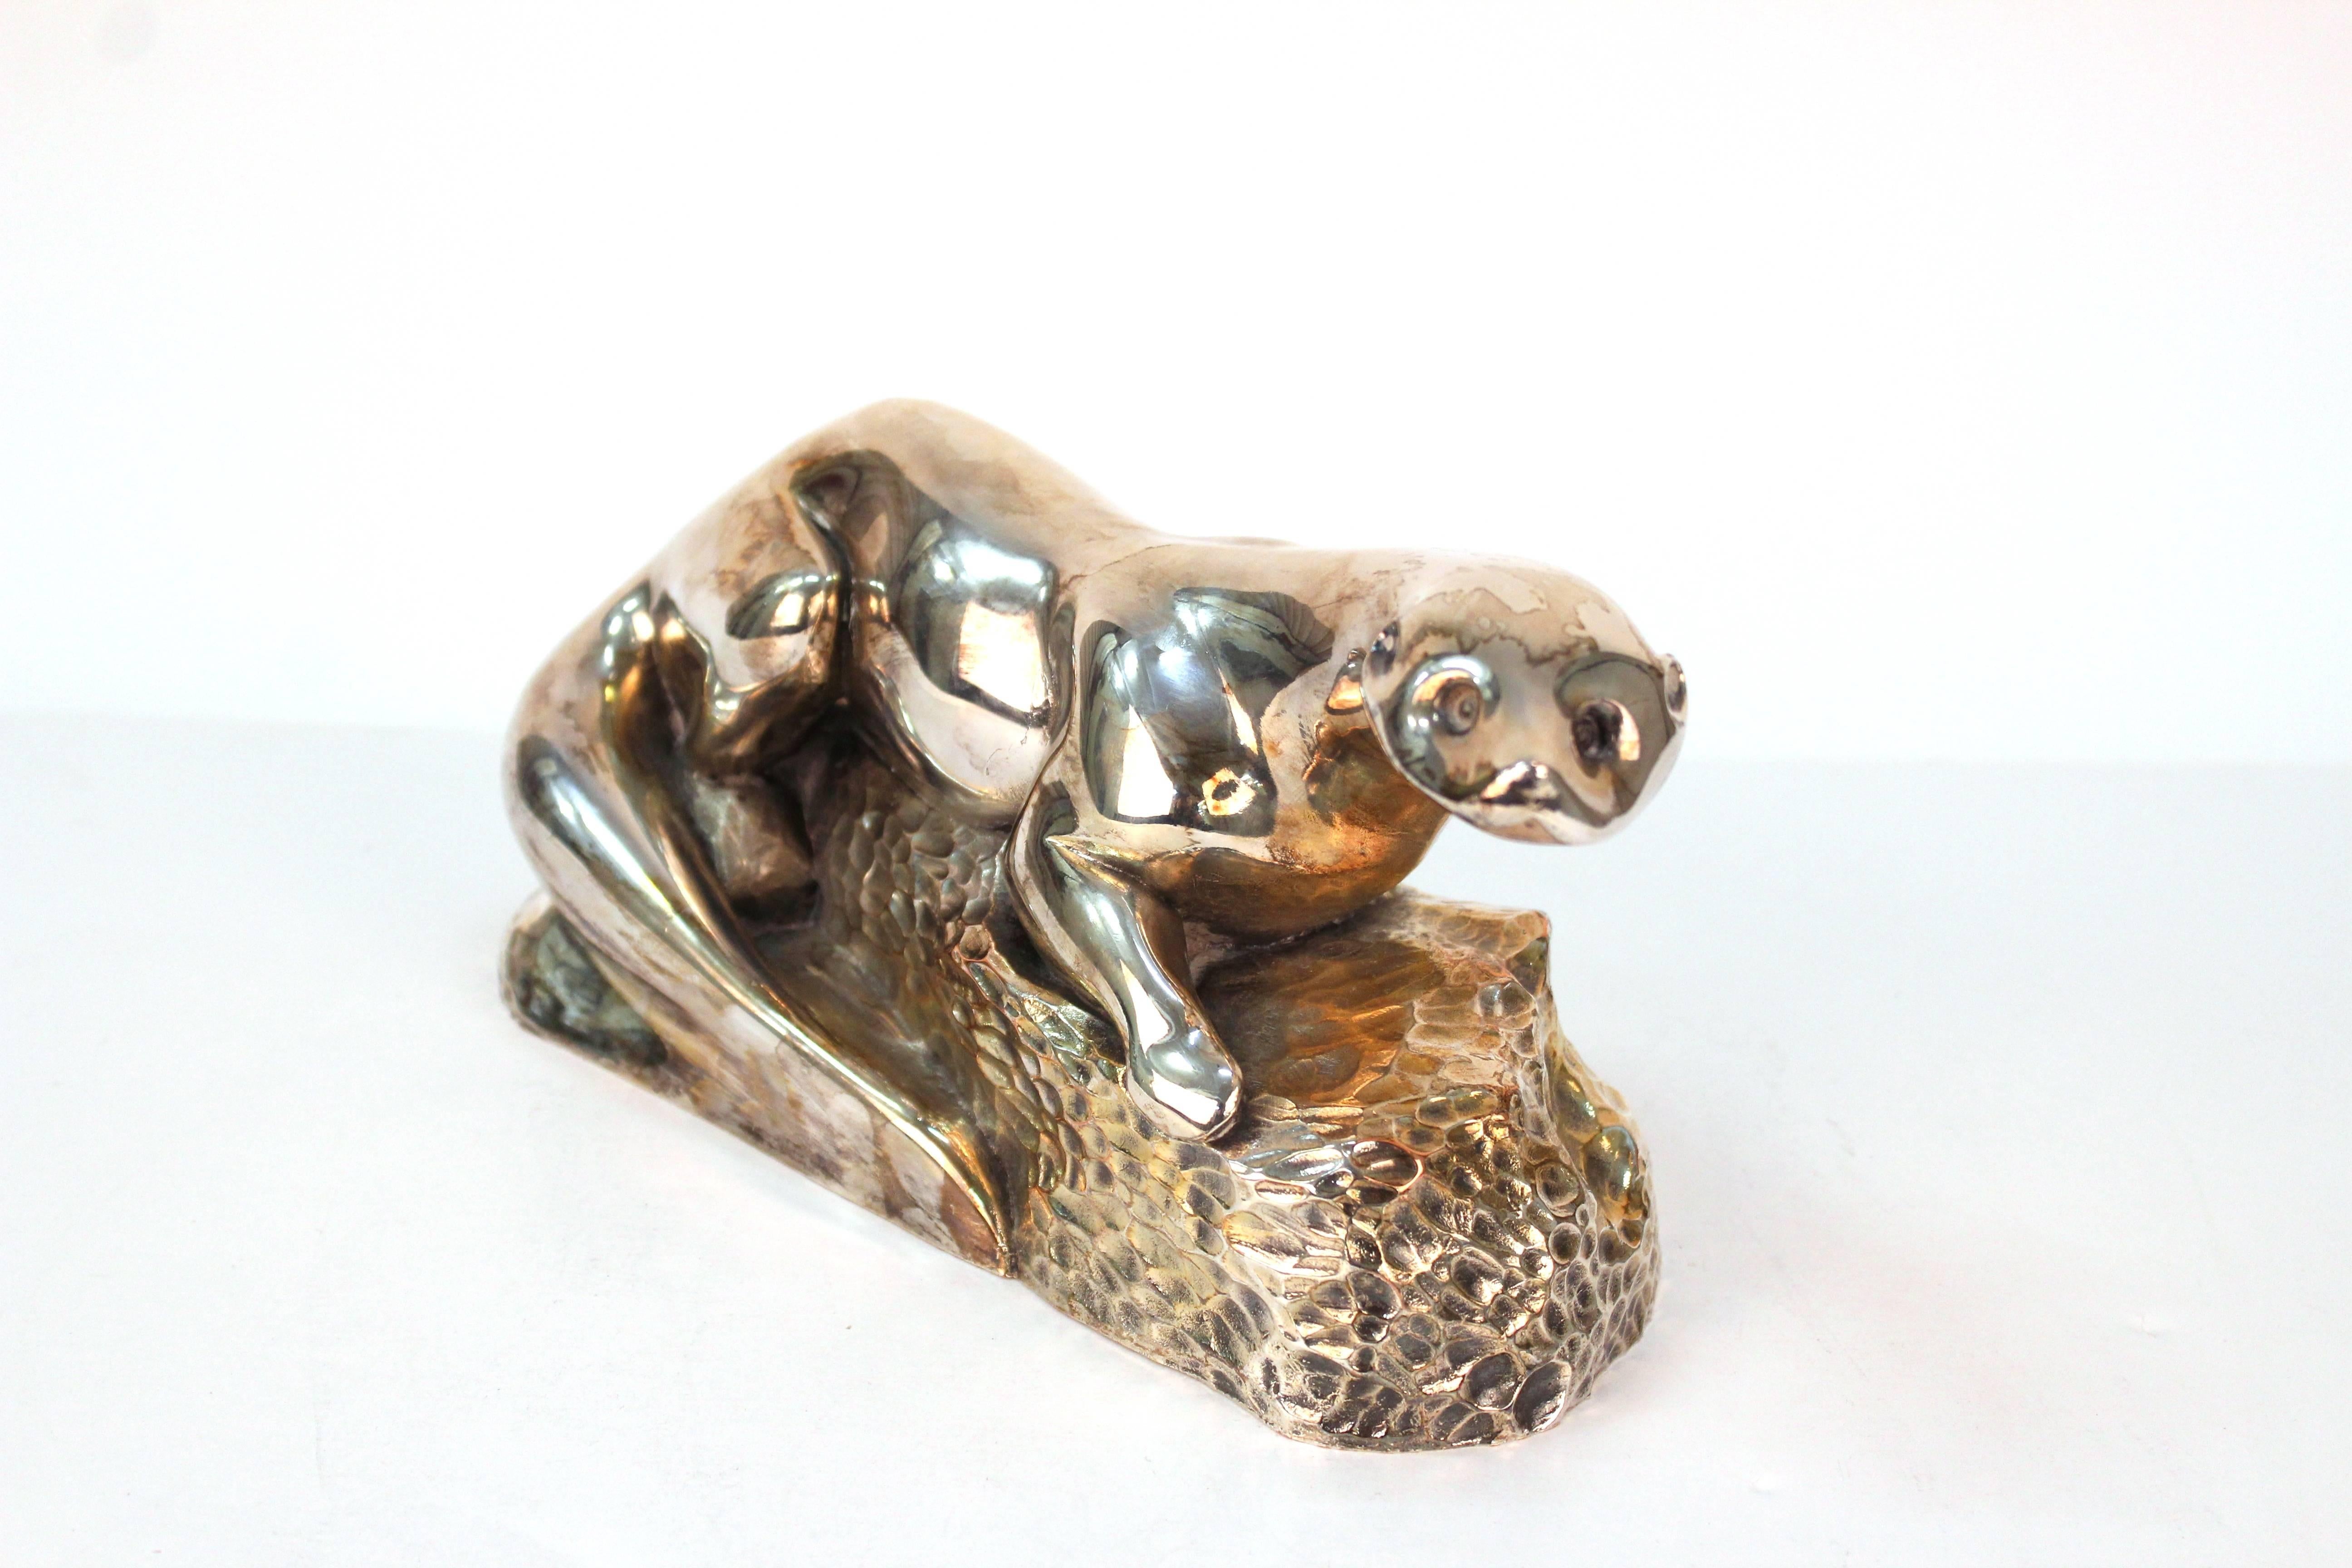 Sculpture of an otter from the mid-20th century Art Deco period, depicted resting on a rock as base, with hammered detail. Markings include artist's signature (albeit indiscernible) to the base. Very good vintage condition, wear to finish consistent